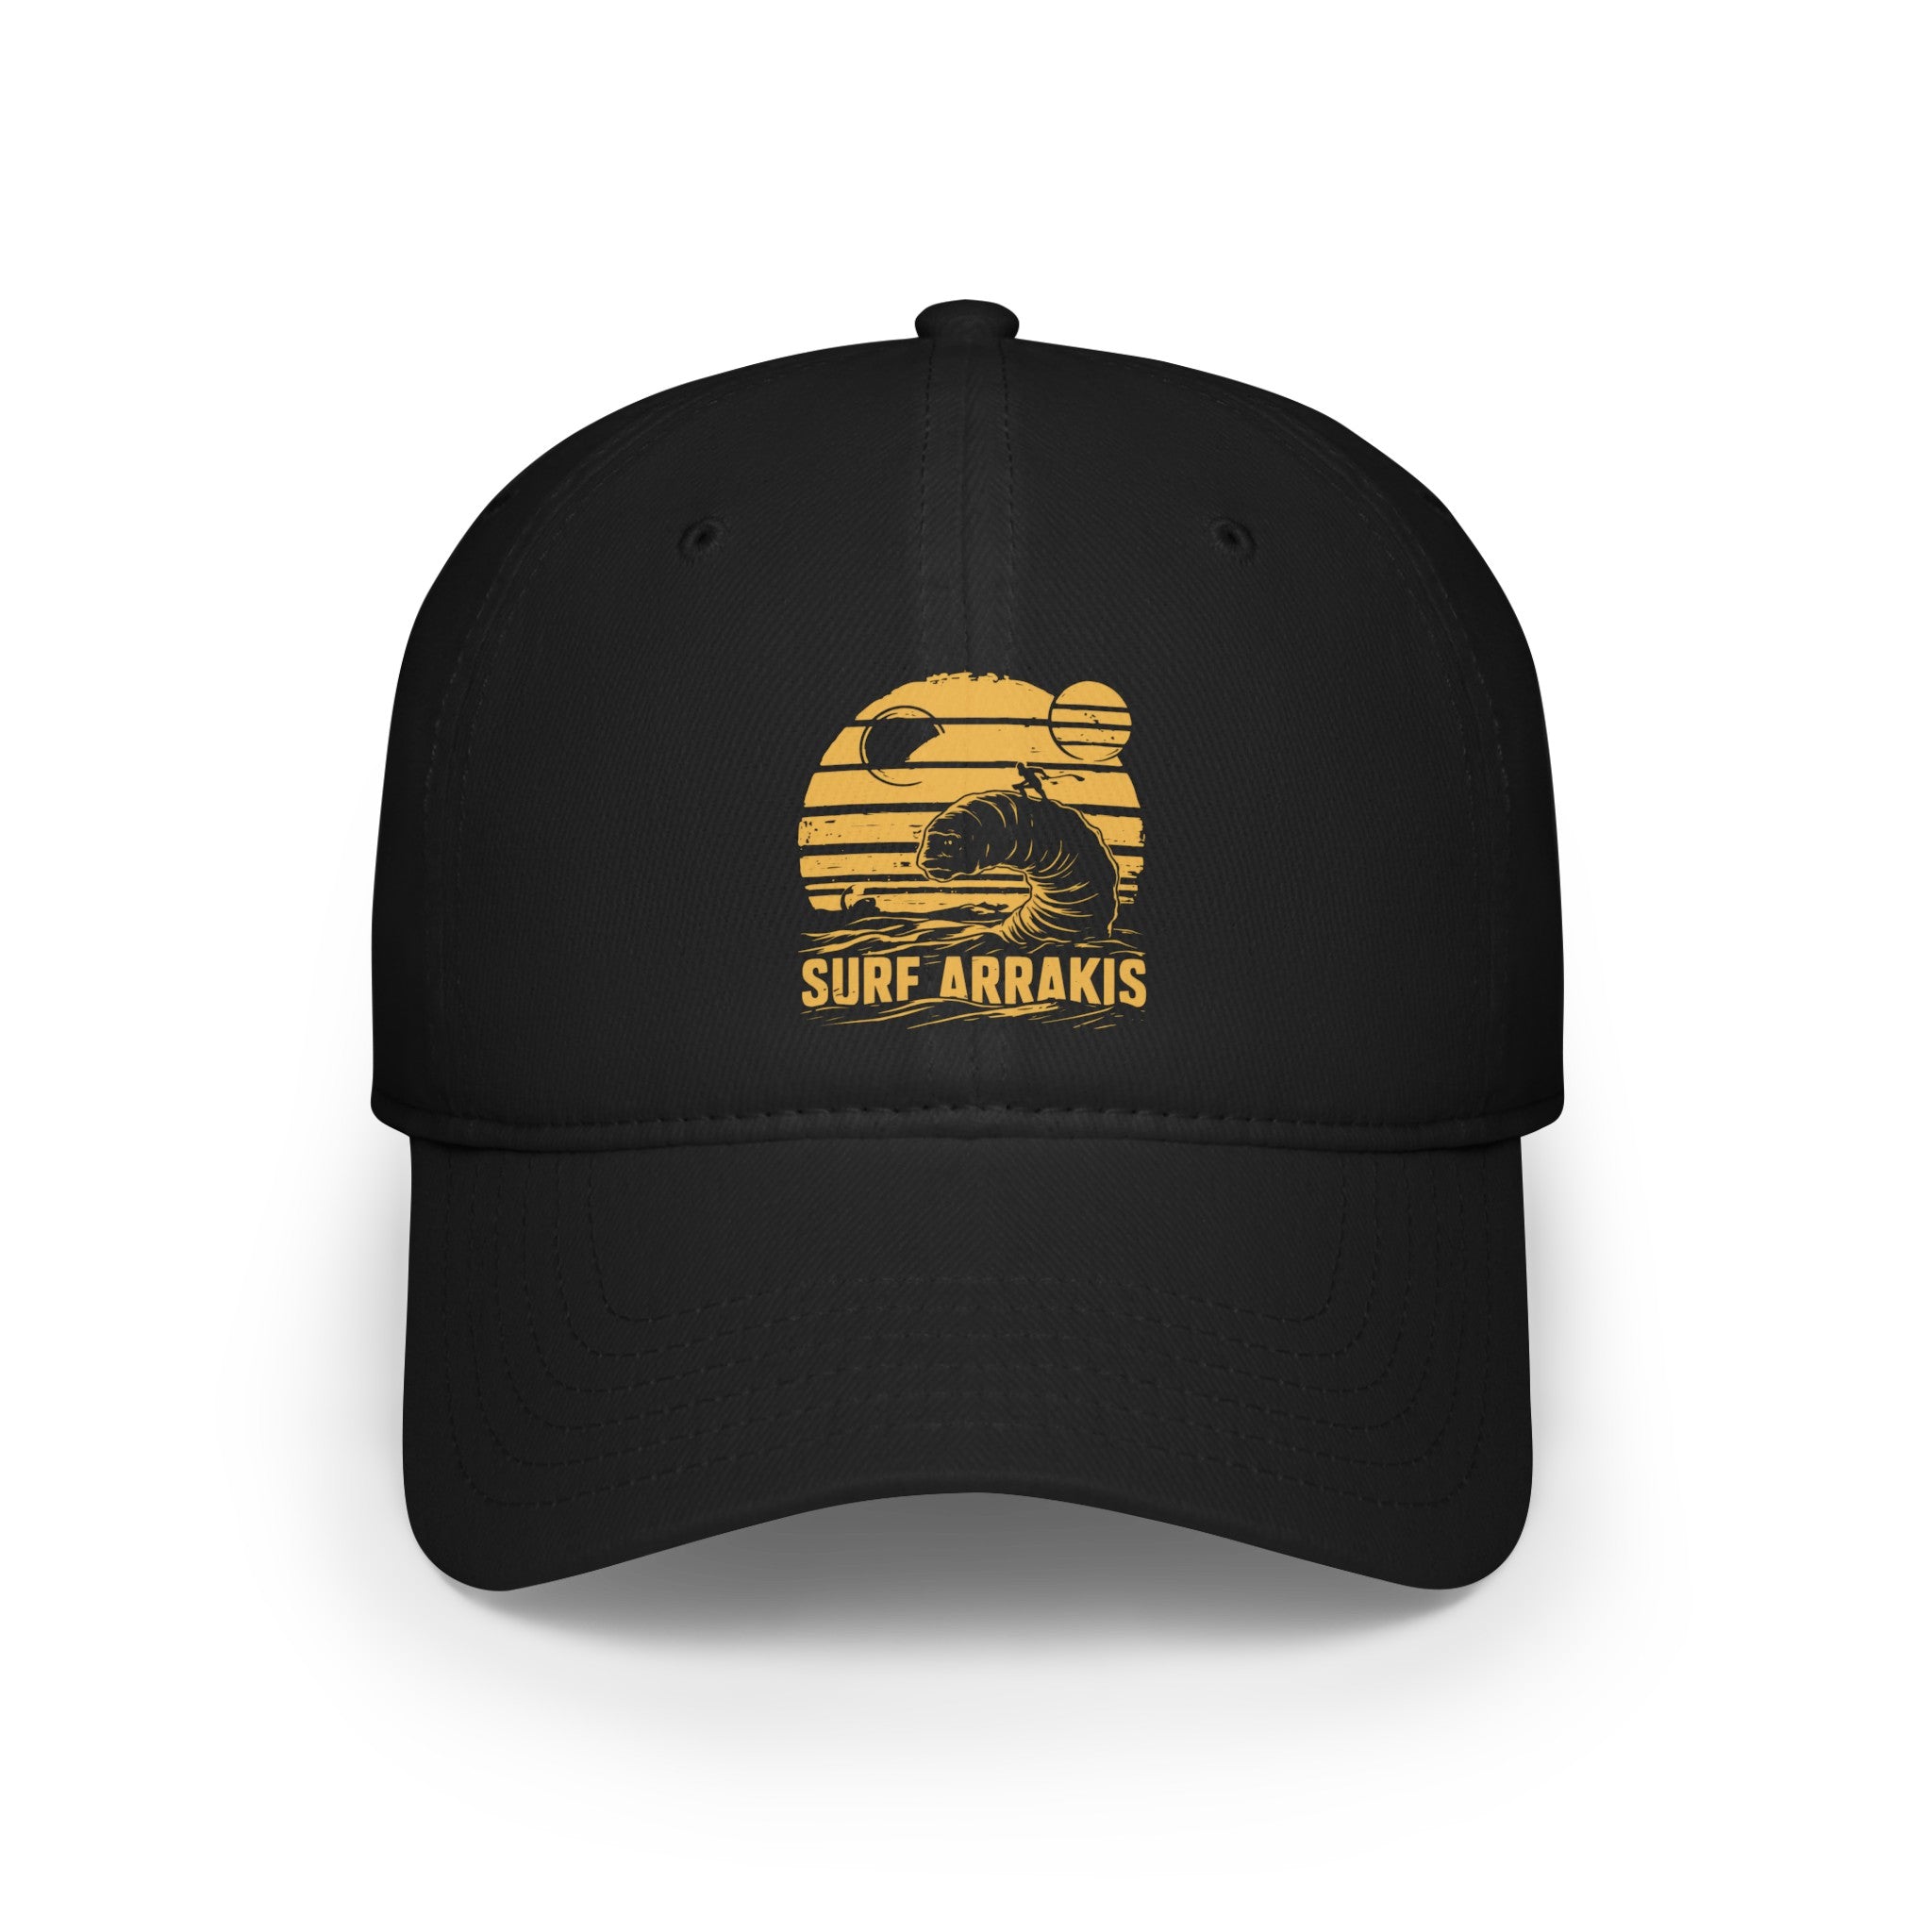 This durable black **Surf Arrakis - Hat** features a stylish yellow graphic of a sandworm surfing a dune with the text "SURF ARRAKIS" underneath.